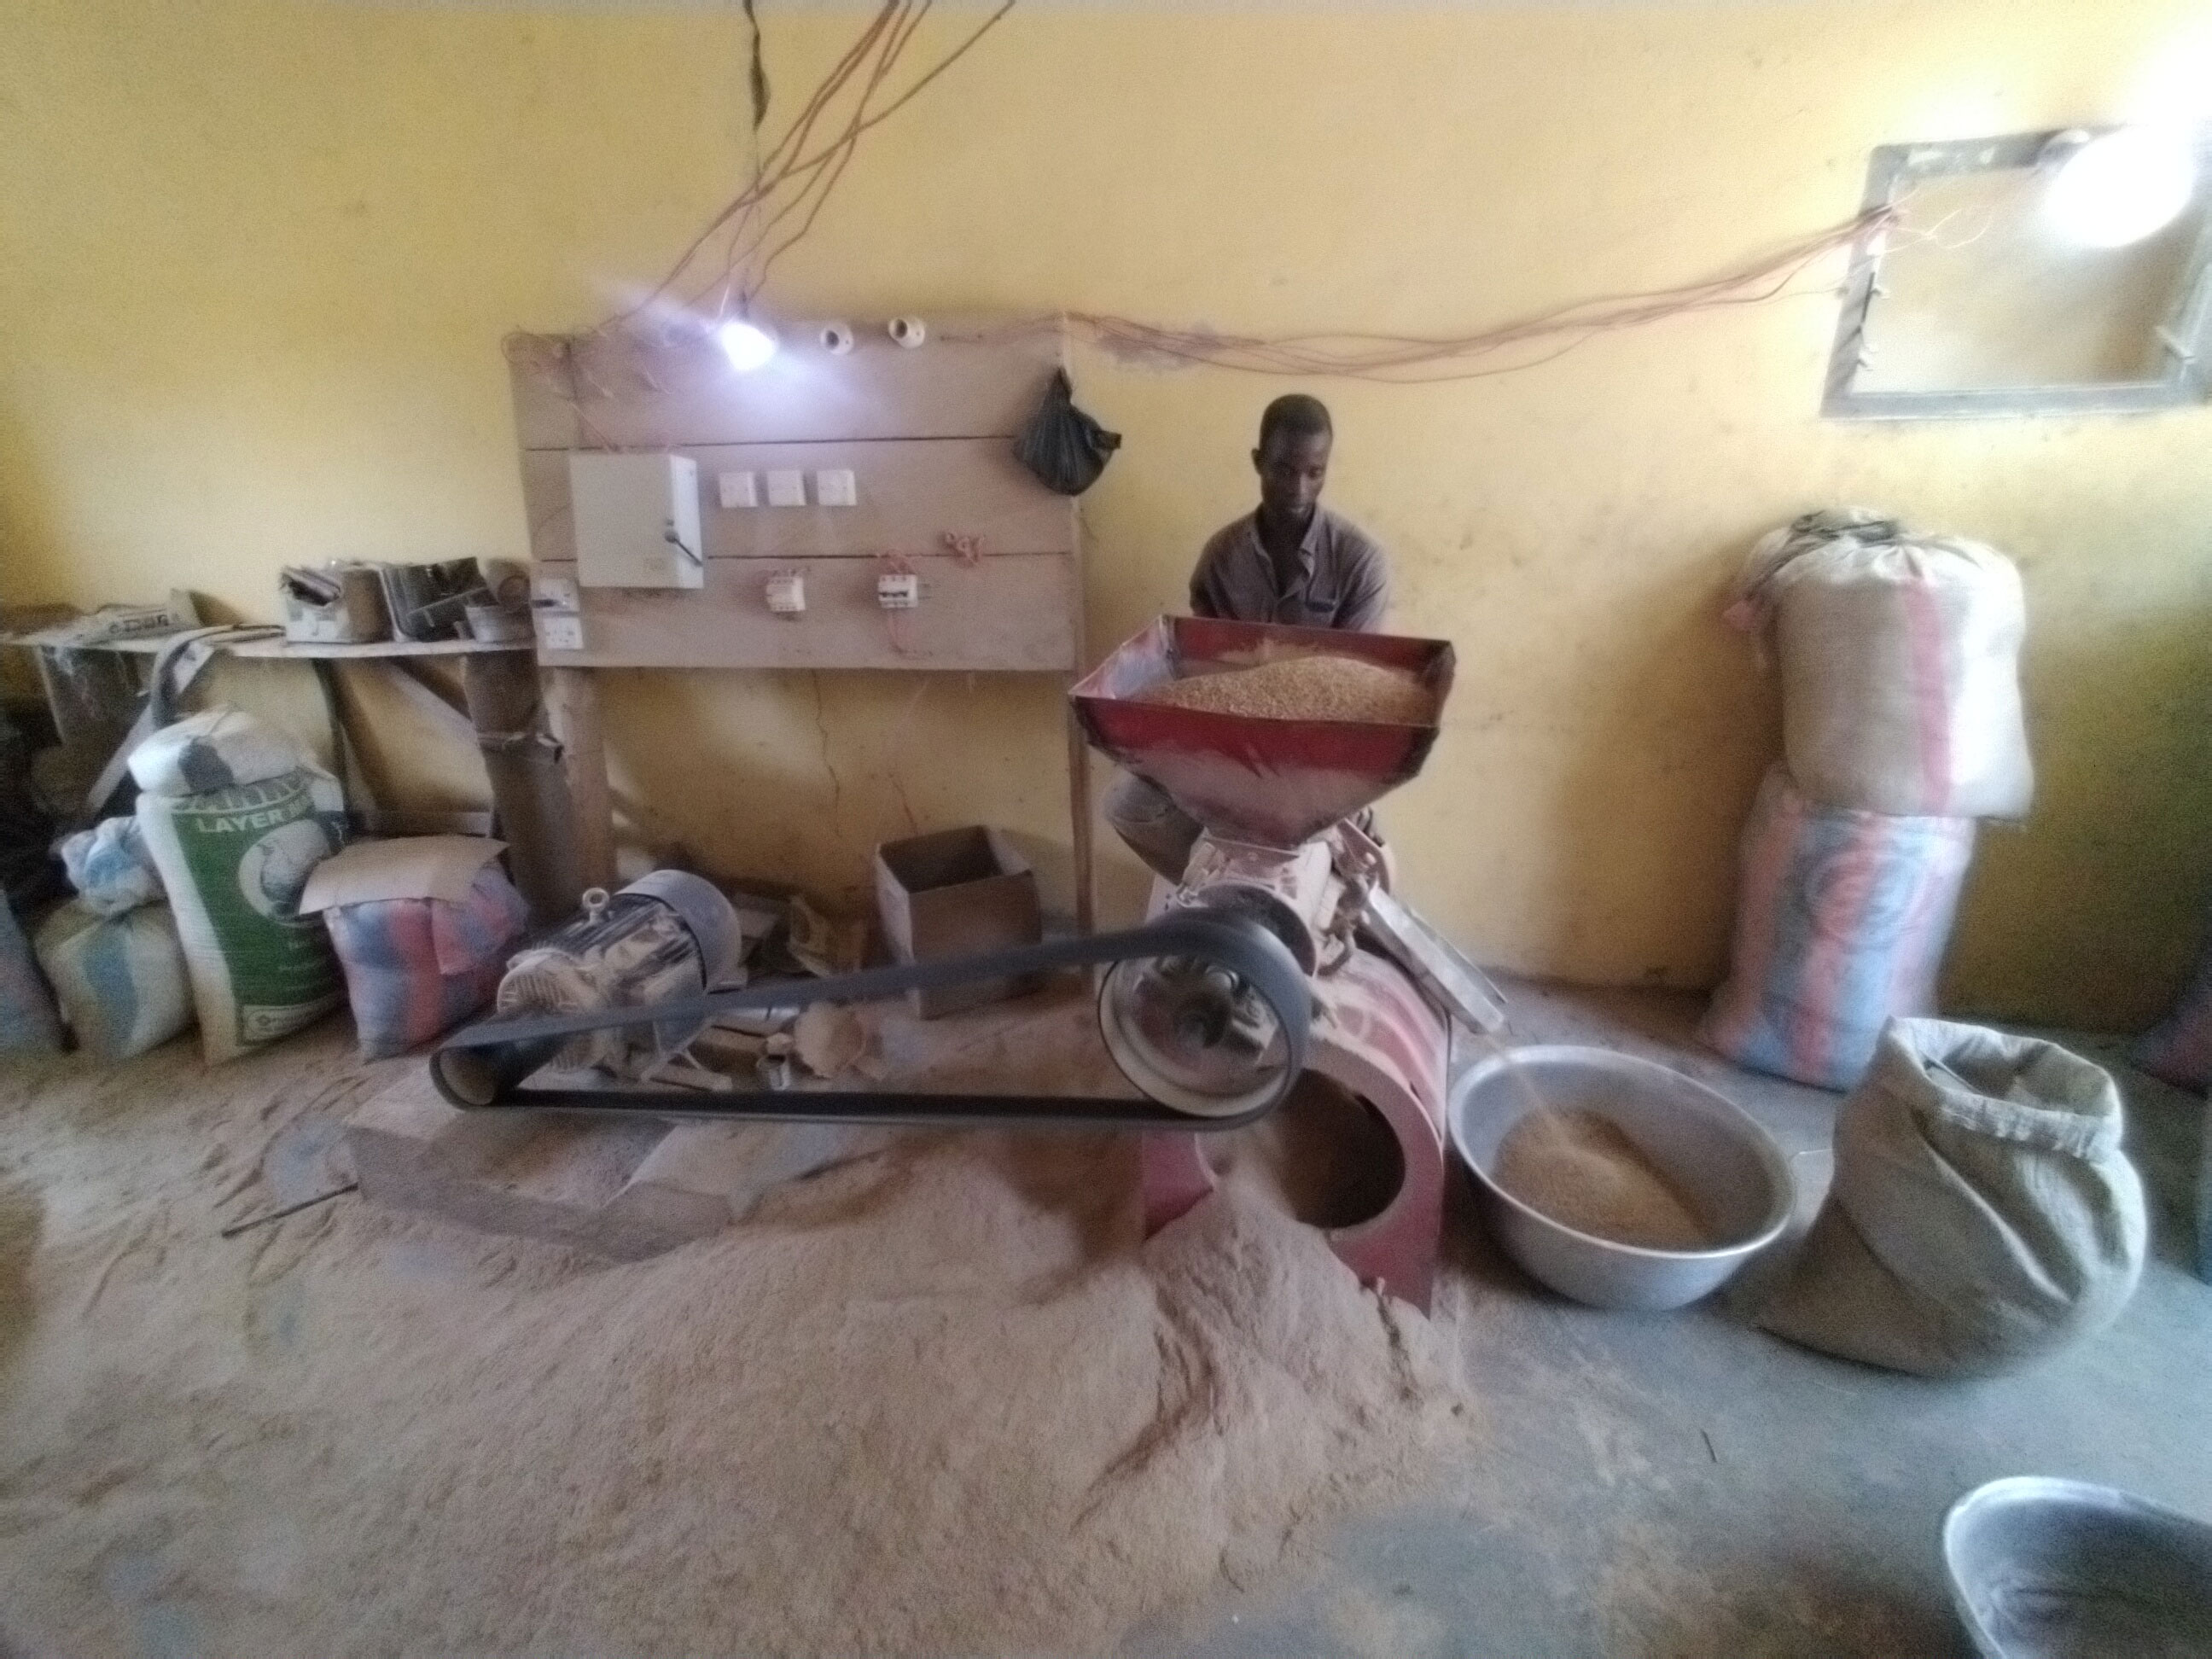 The rice milling machine removes the husk of the grain, making it edible.  A lot of chaff is produced in the process.